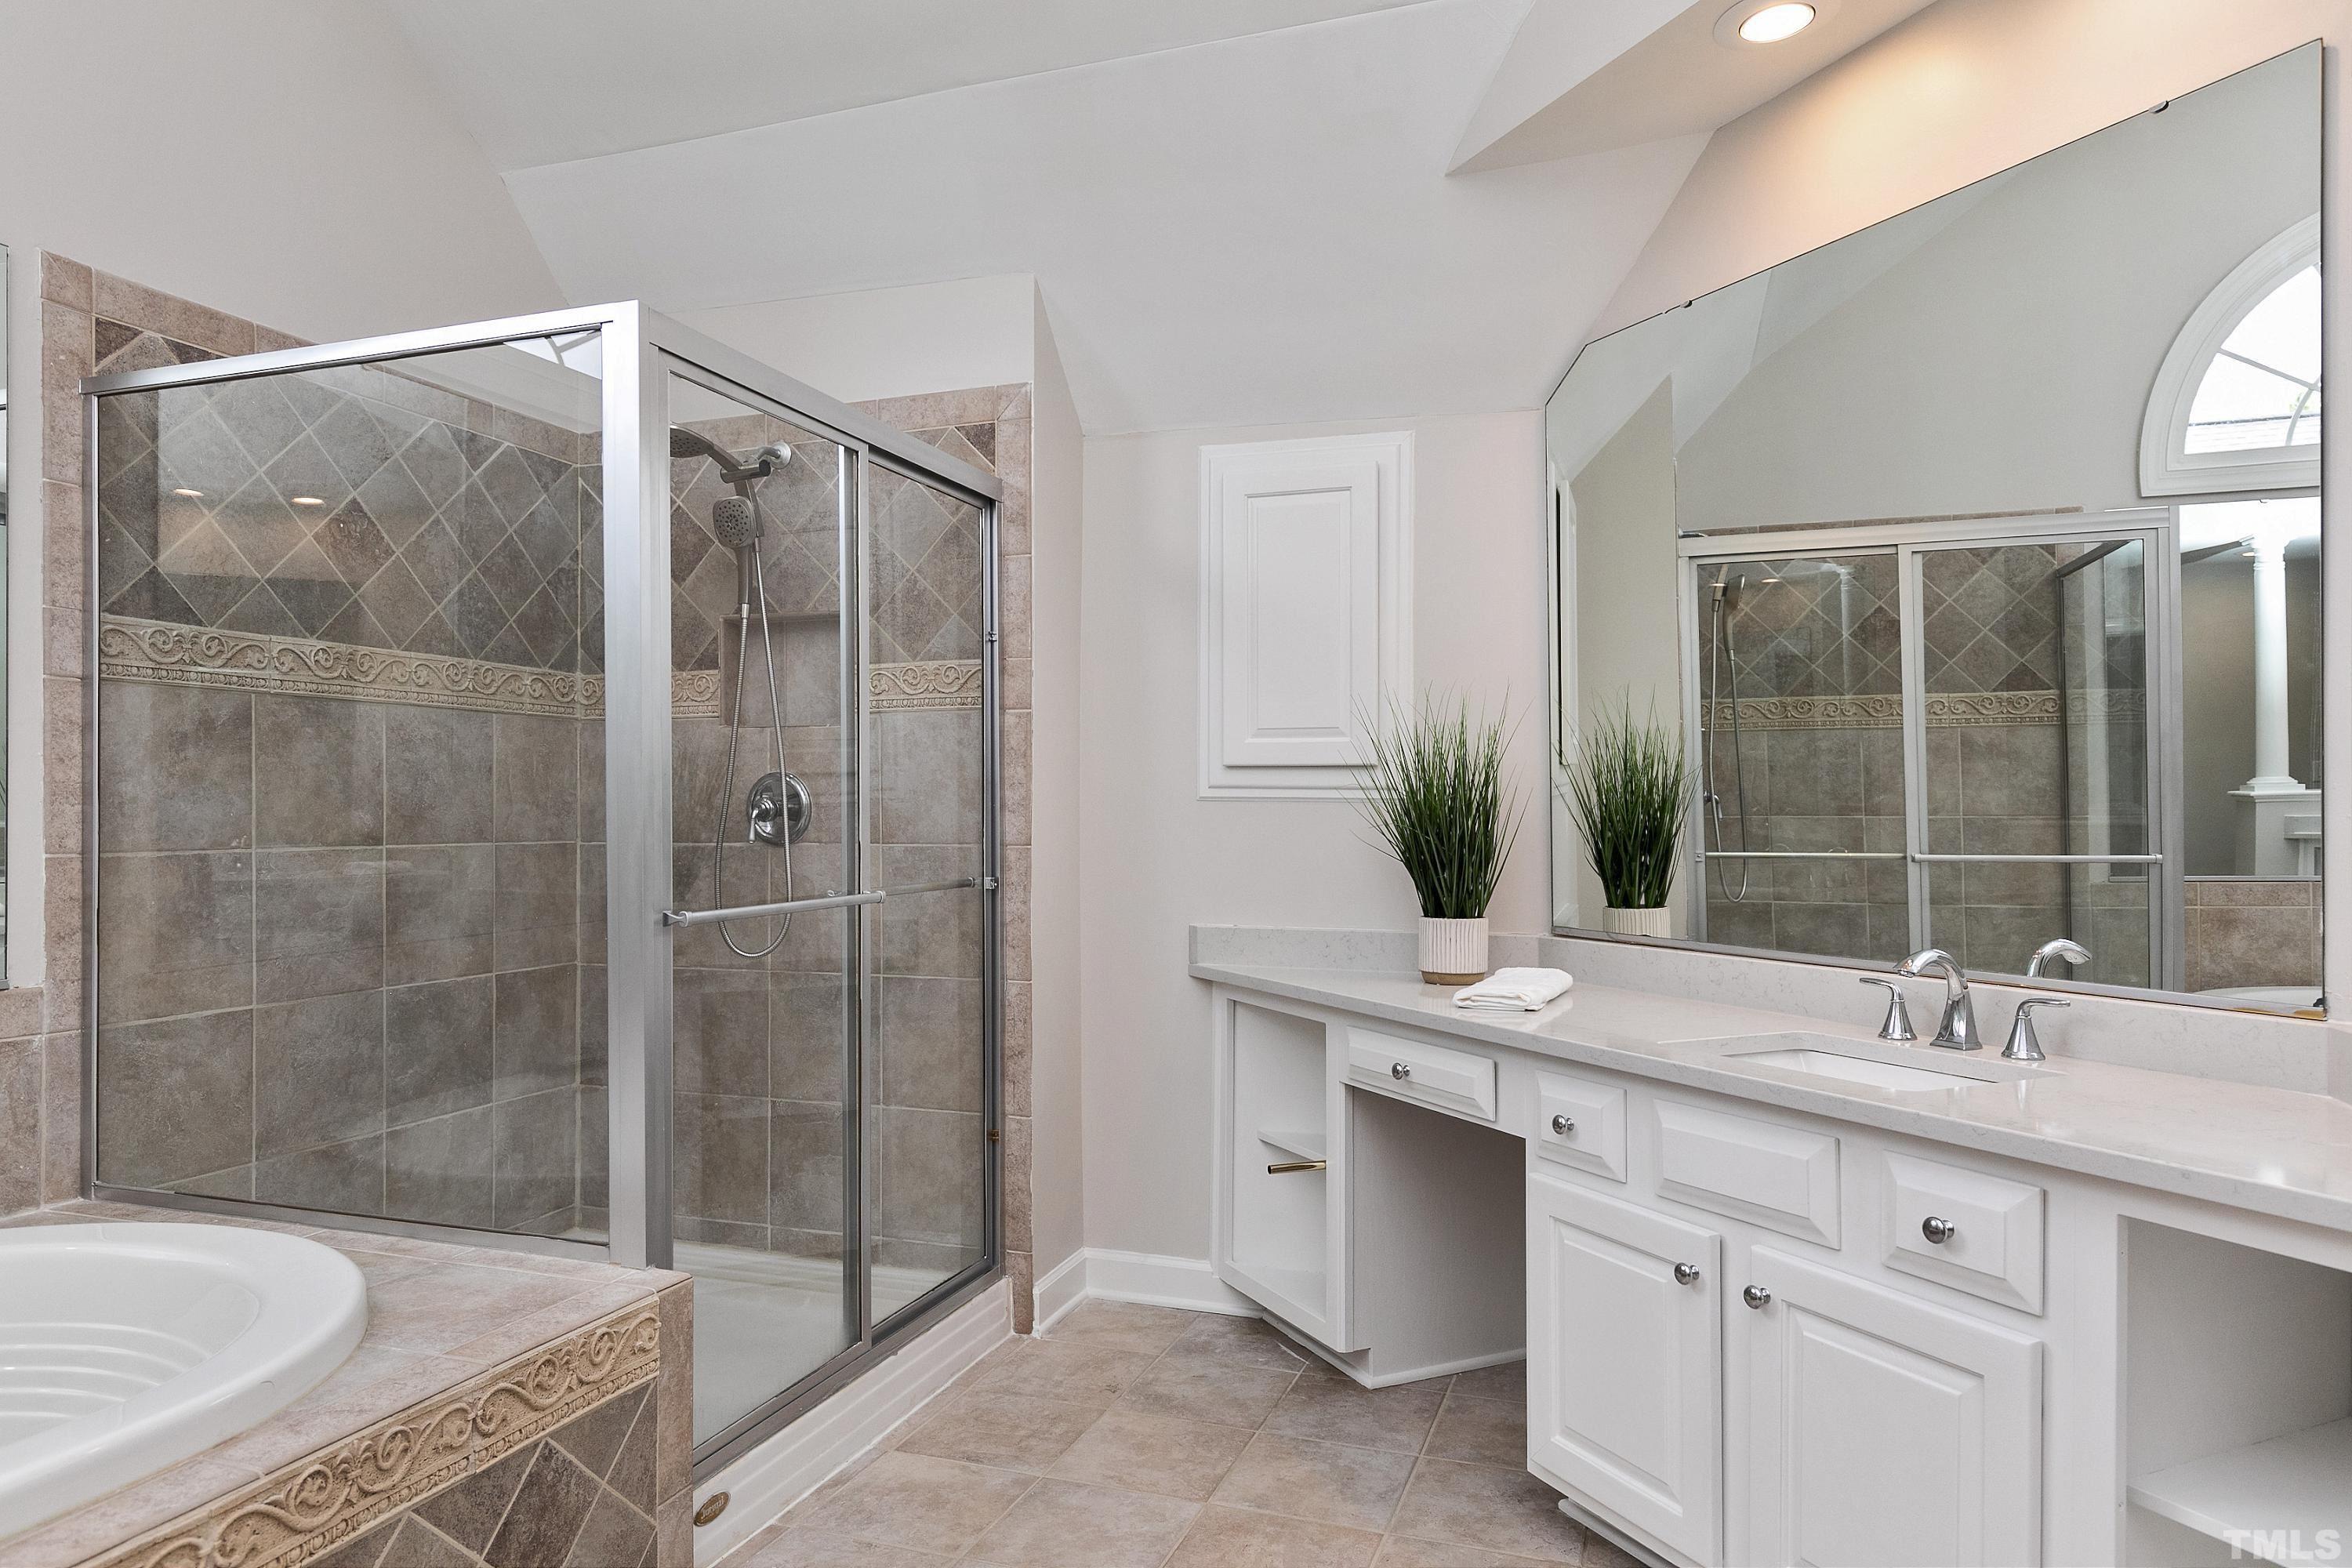 Luxury bath with whirlpool tub, walk in shower and 2 vanities with QUARTZ tops!